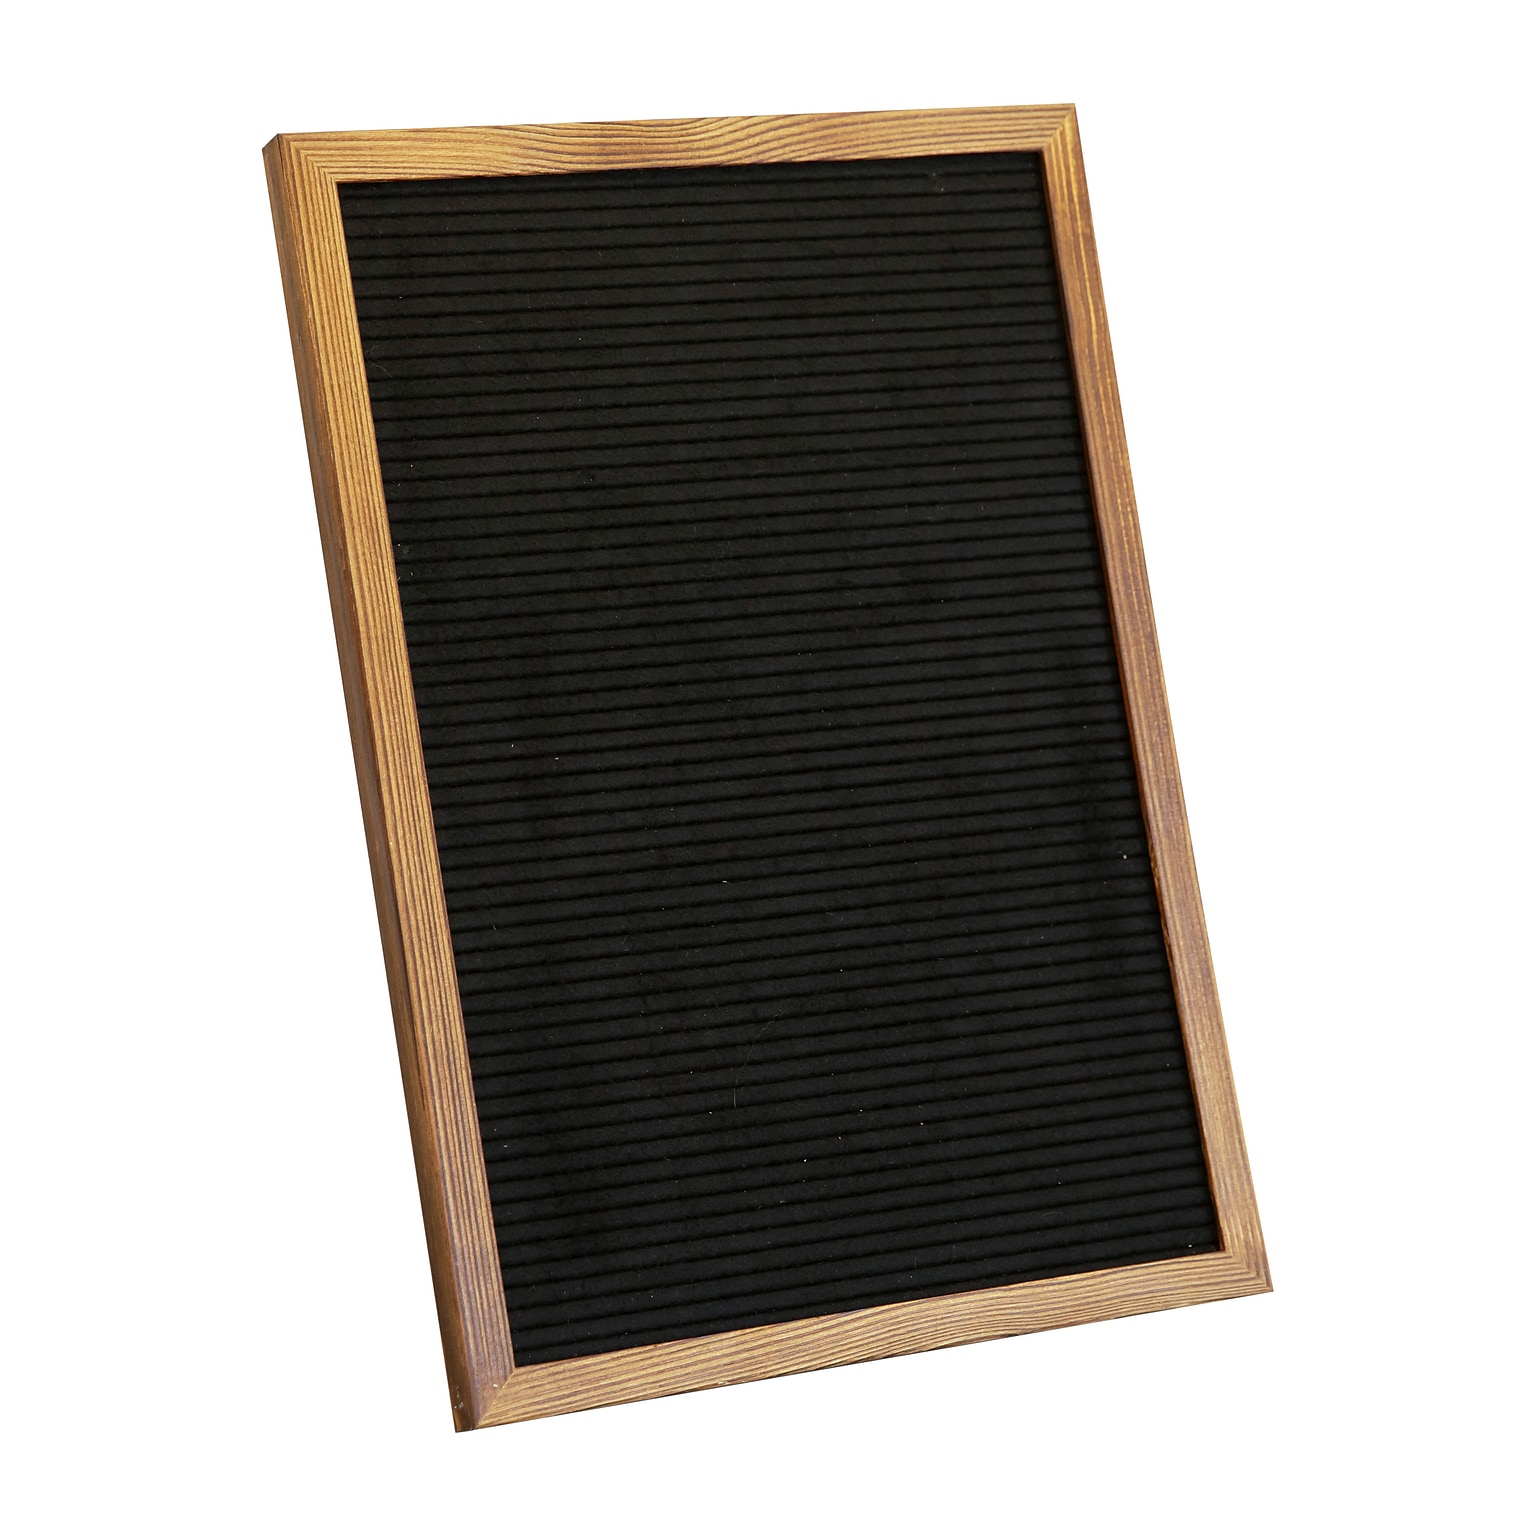 Flash Furniture Gracie Felt Letter Board with Letters, 12 x 17, Torched Wood/Black Felt (HGWAFB1217TORCH)